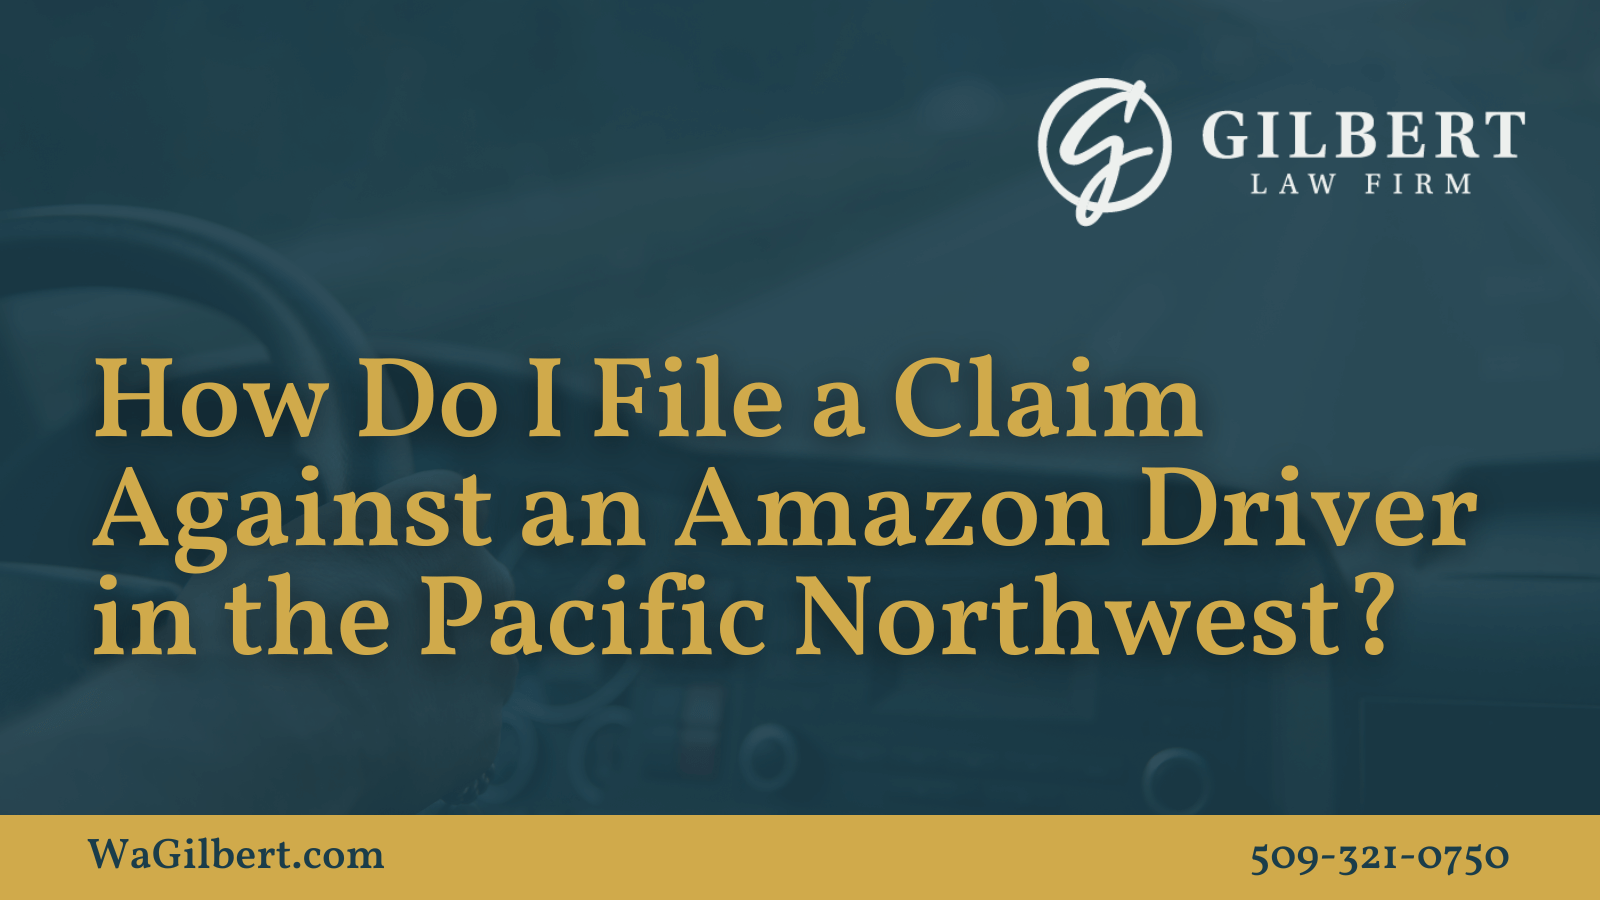 How Do I File a Claim Against an Amazon Driver in the Pacific Northwest | Gilbert Law Firm Spokane Washington